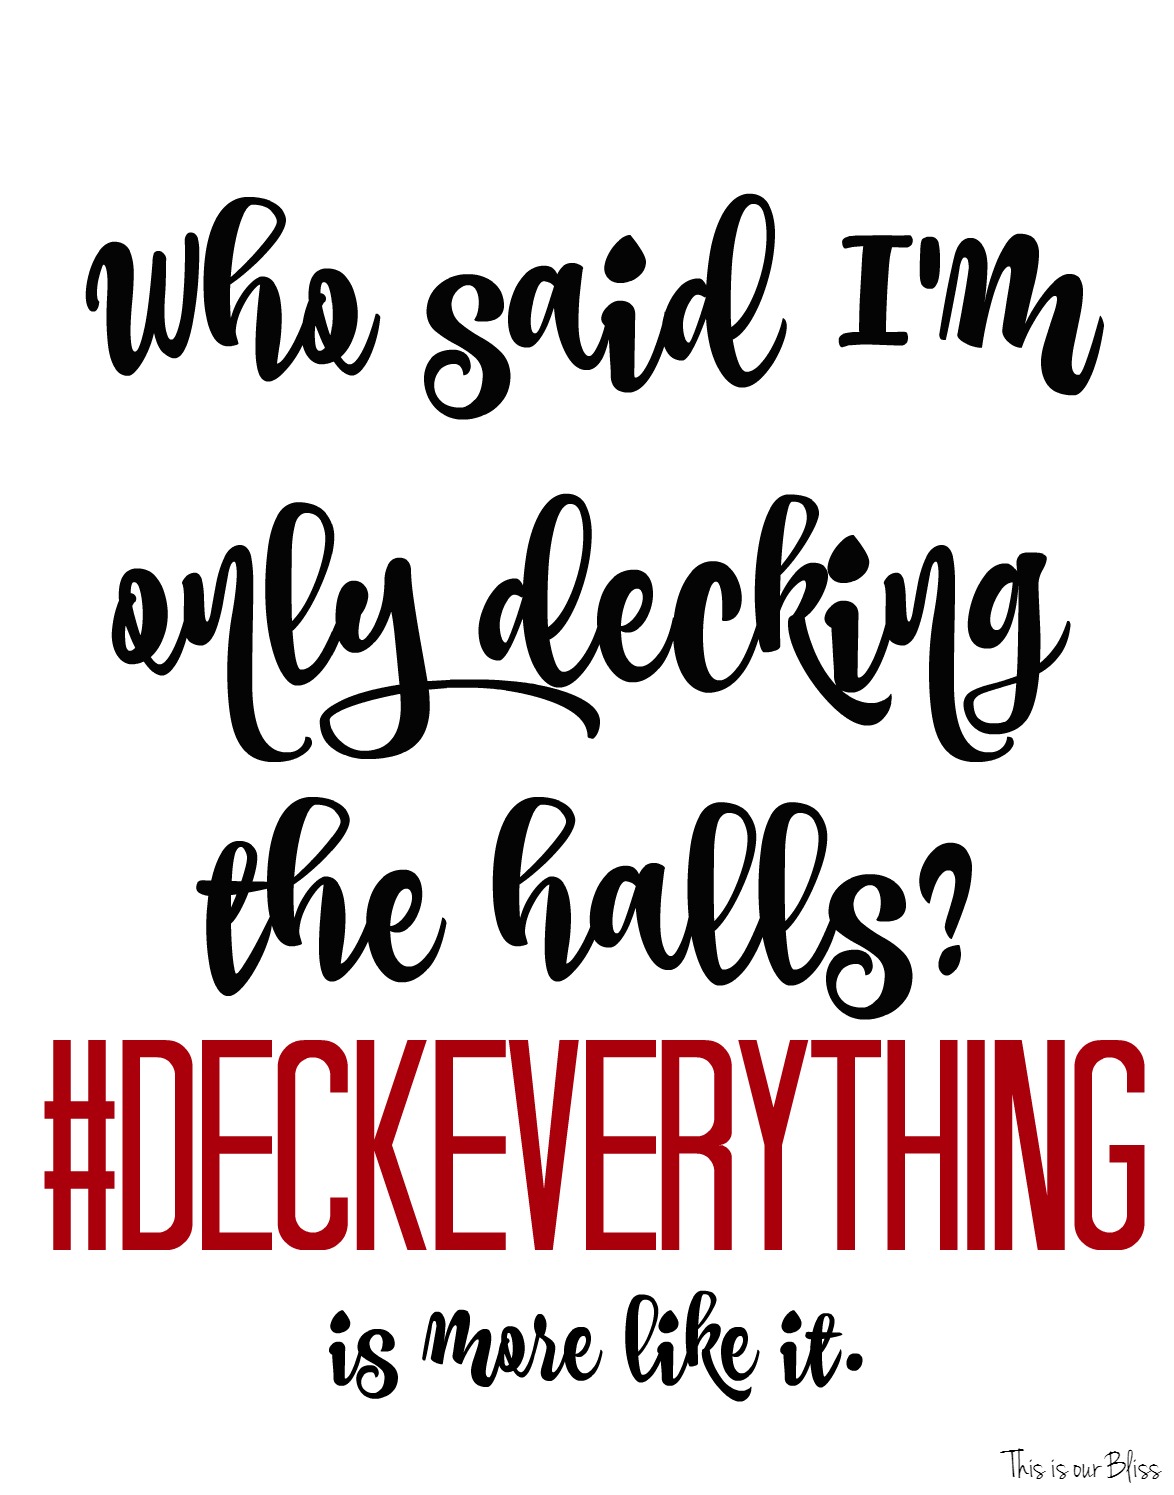 deck everything - This is our Bliss